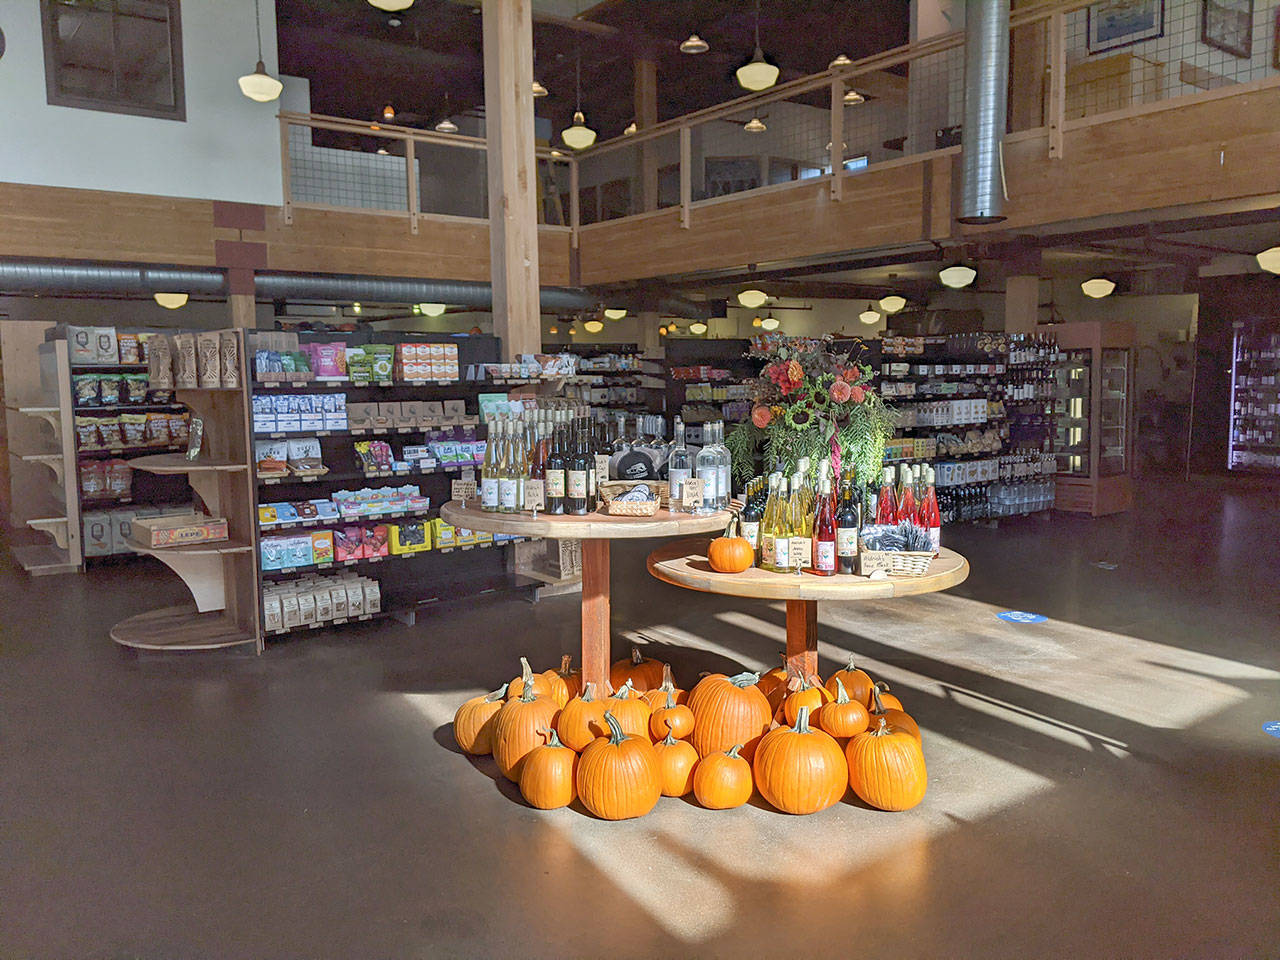 The first thing people see walking into Aldrich’s Market now is a wine and vodka display that is a collaboration between Aldrich’s, Port Townsend Vineyard and Admiralty Distillers to celebrate the 125-year-old history of Aldrich’s Market. (Zach Jablonski/Peninsula Daily News)